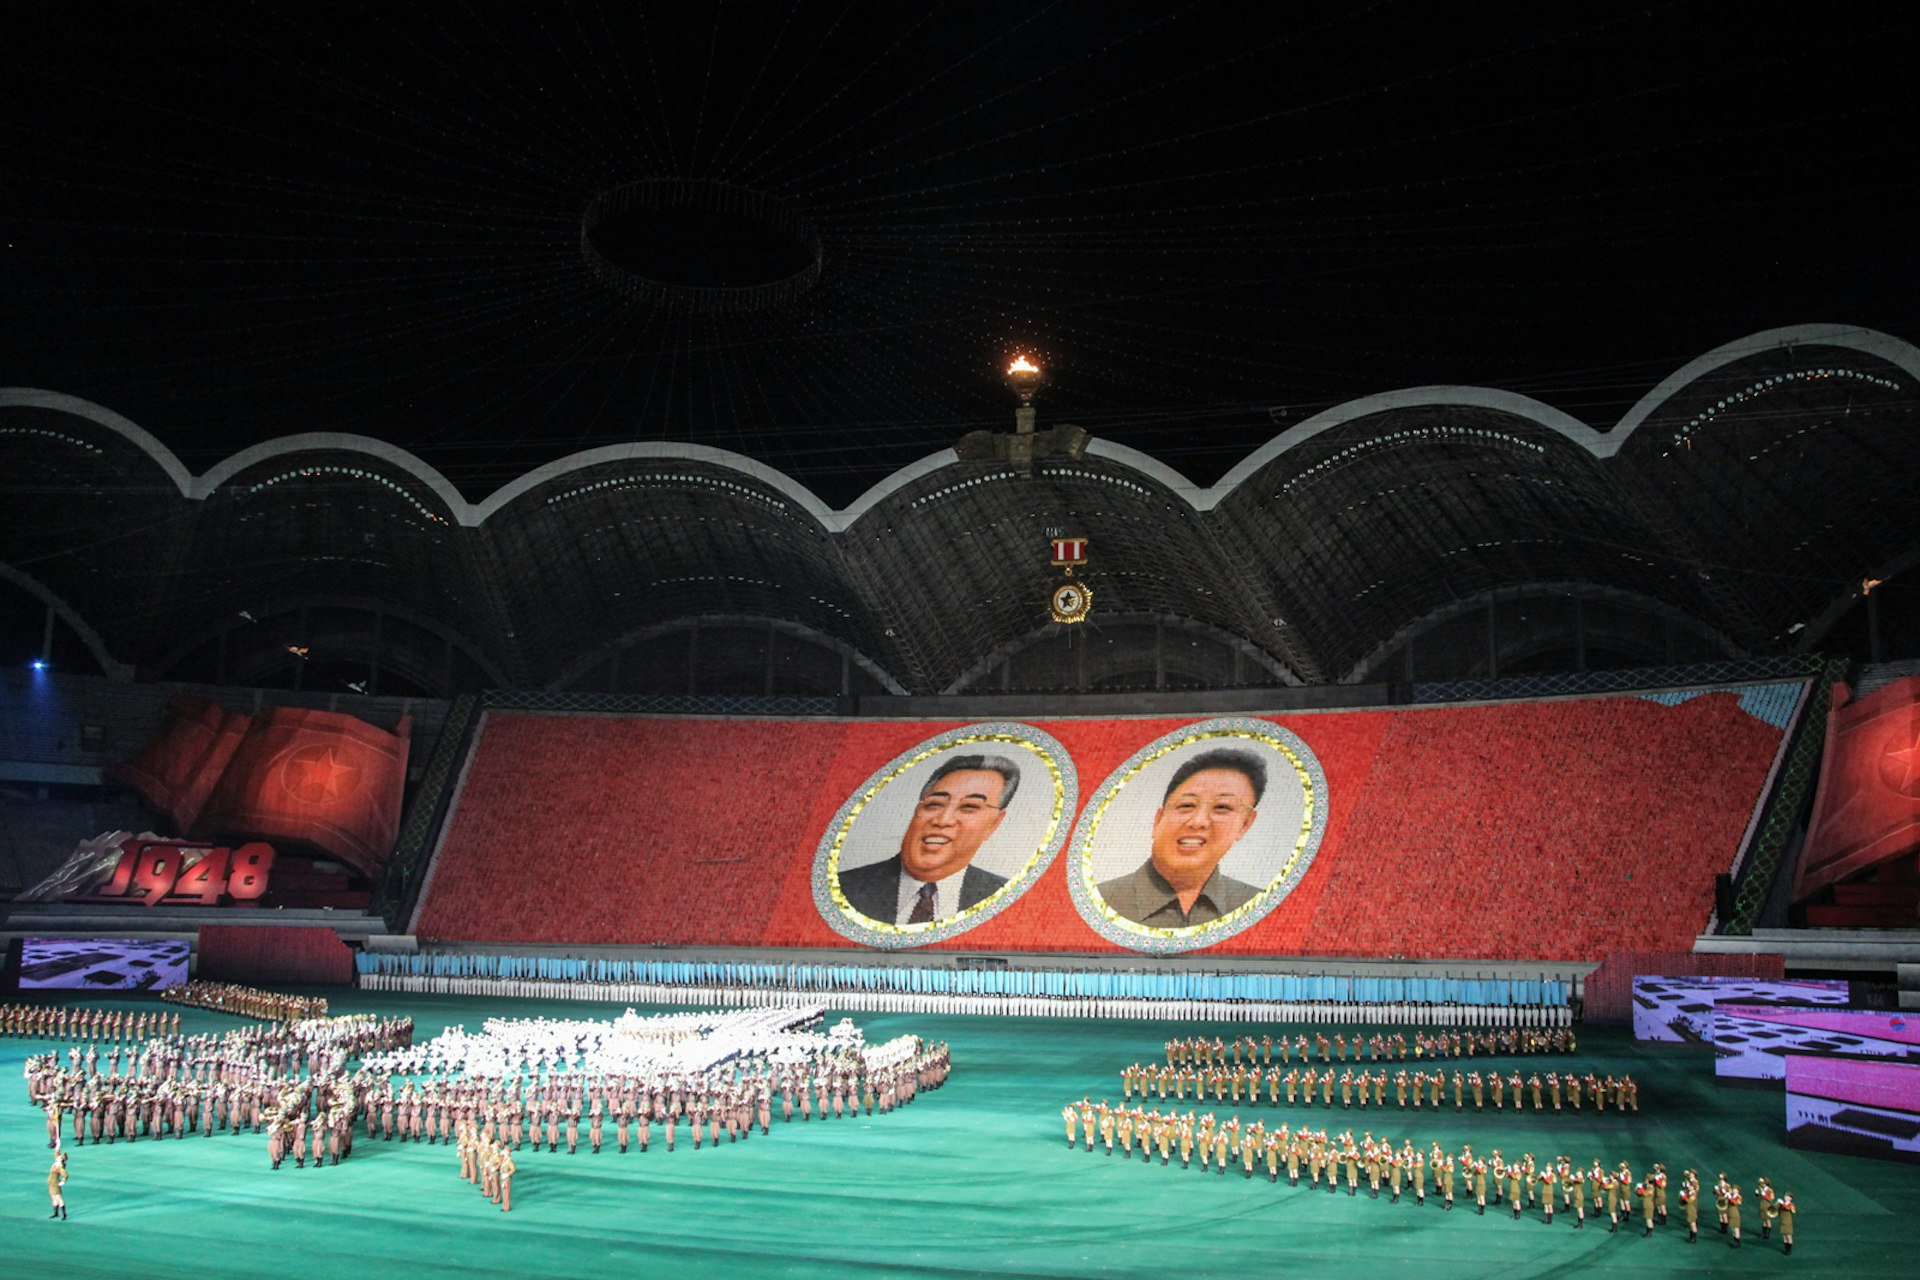 Card stunt depicting the former DPRK leaders Kim-il-Sung and Kim-Jong- il.